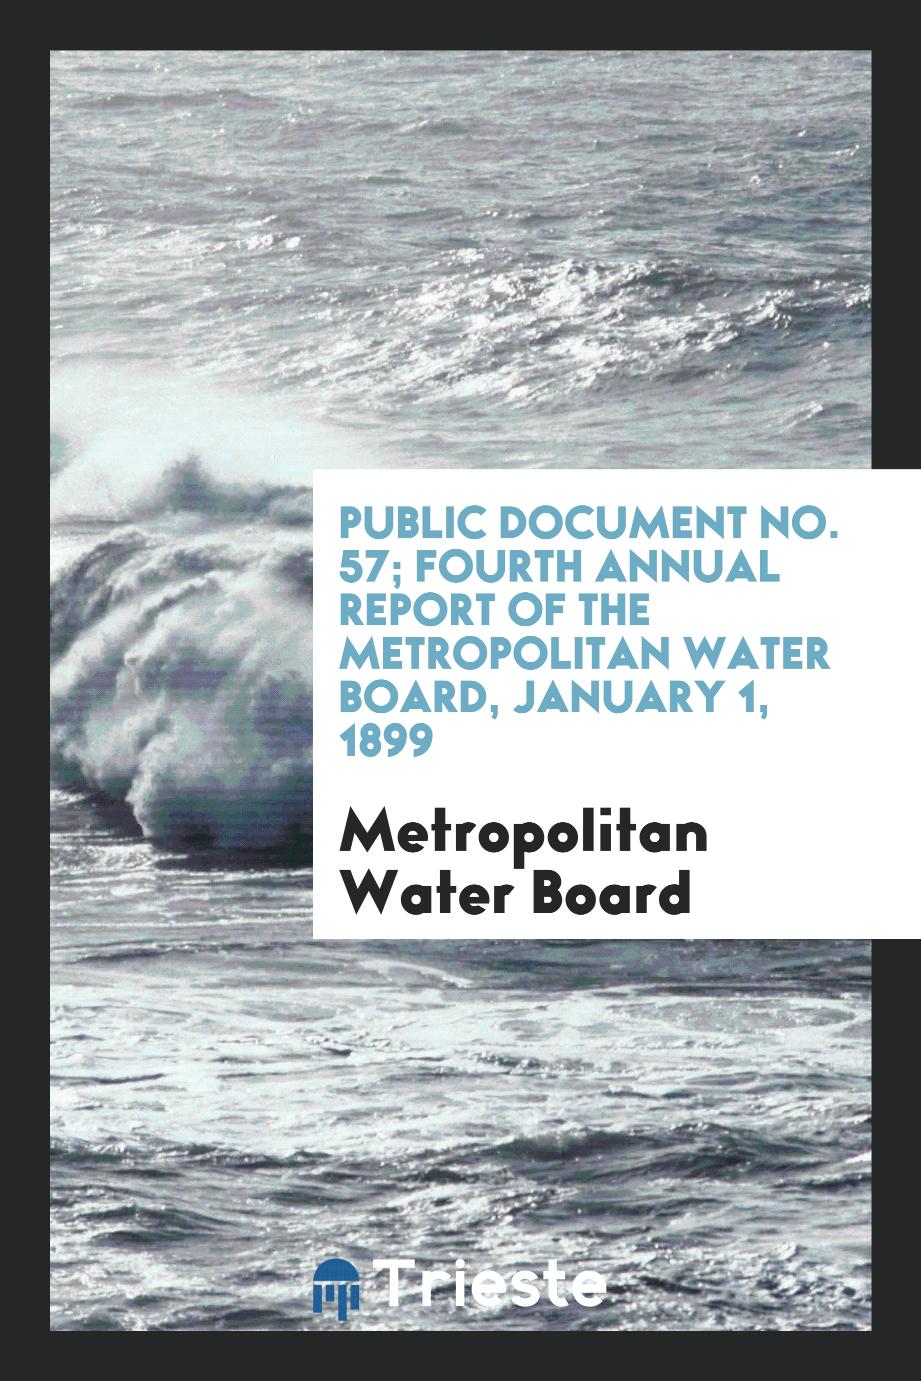 Public Document No. 57; Fourth Annual Report of the Metropolitan Water Board, January 1, 1899